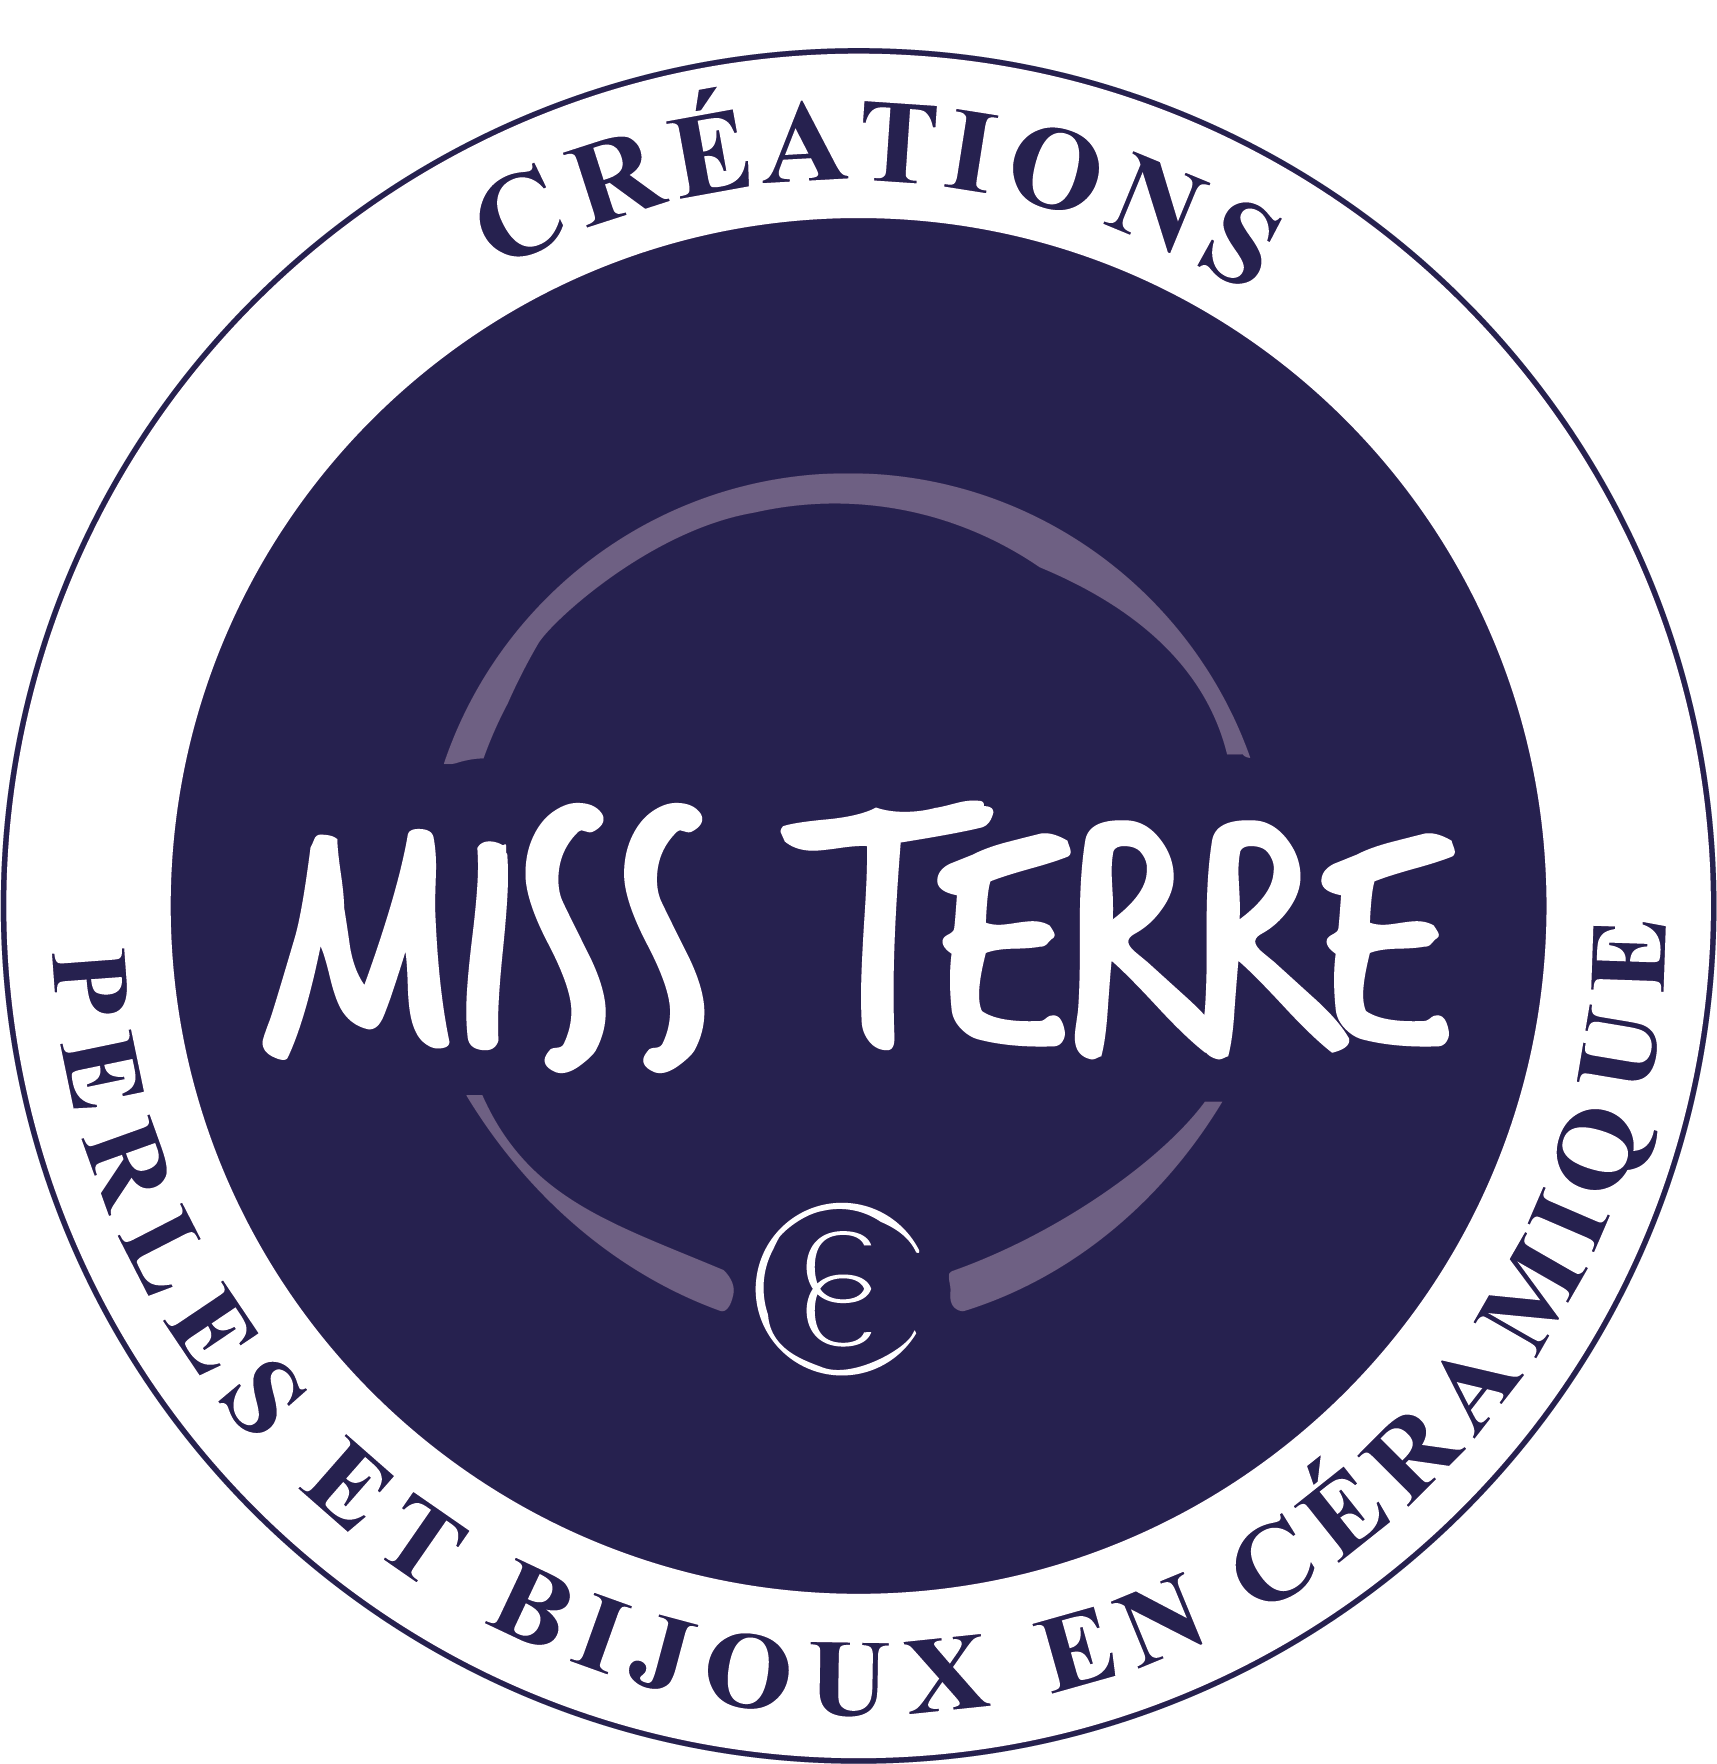 Créations Miss Terre- Christelle Caceres